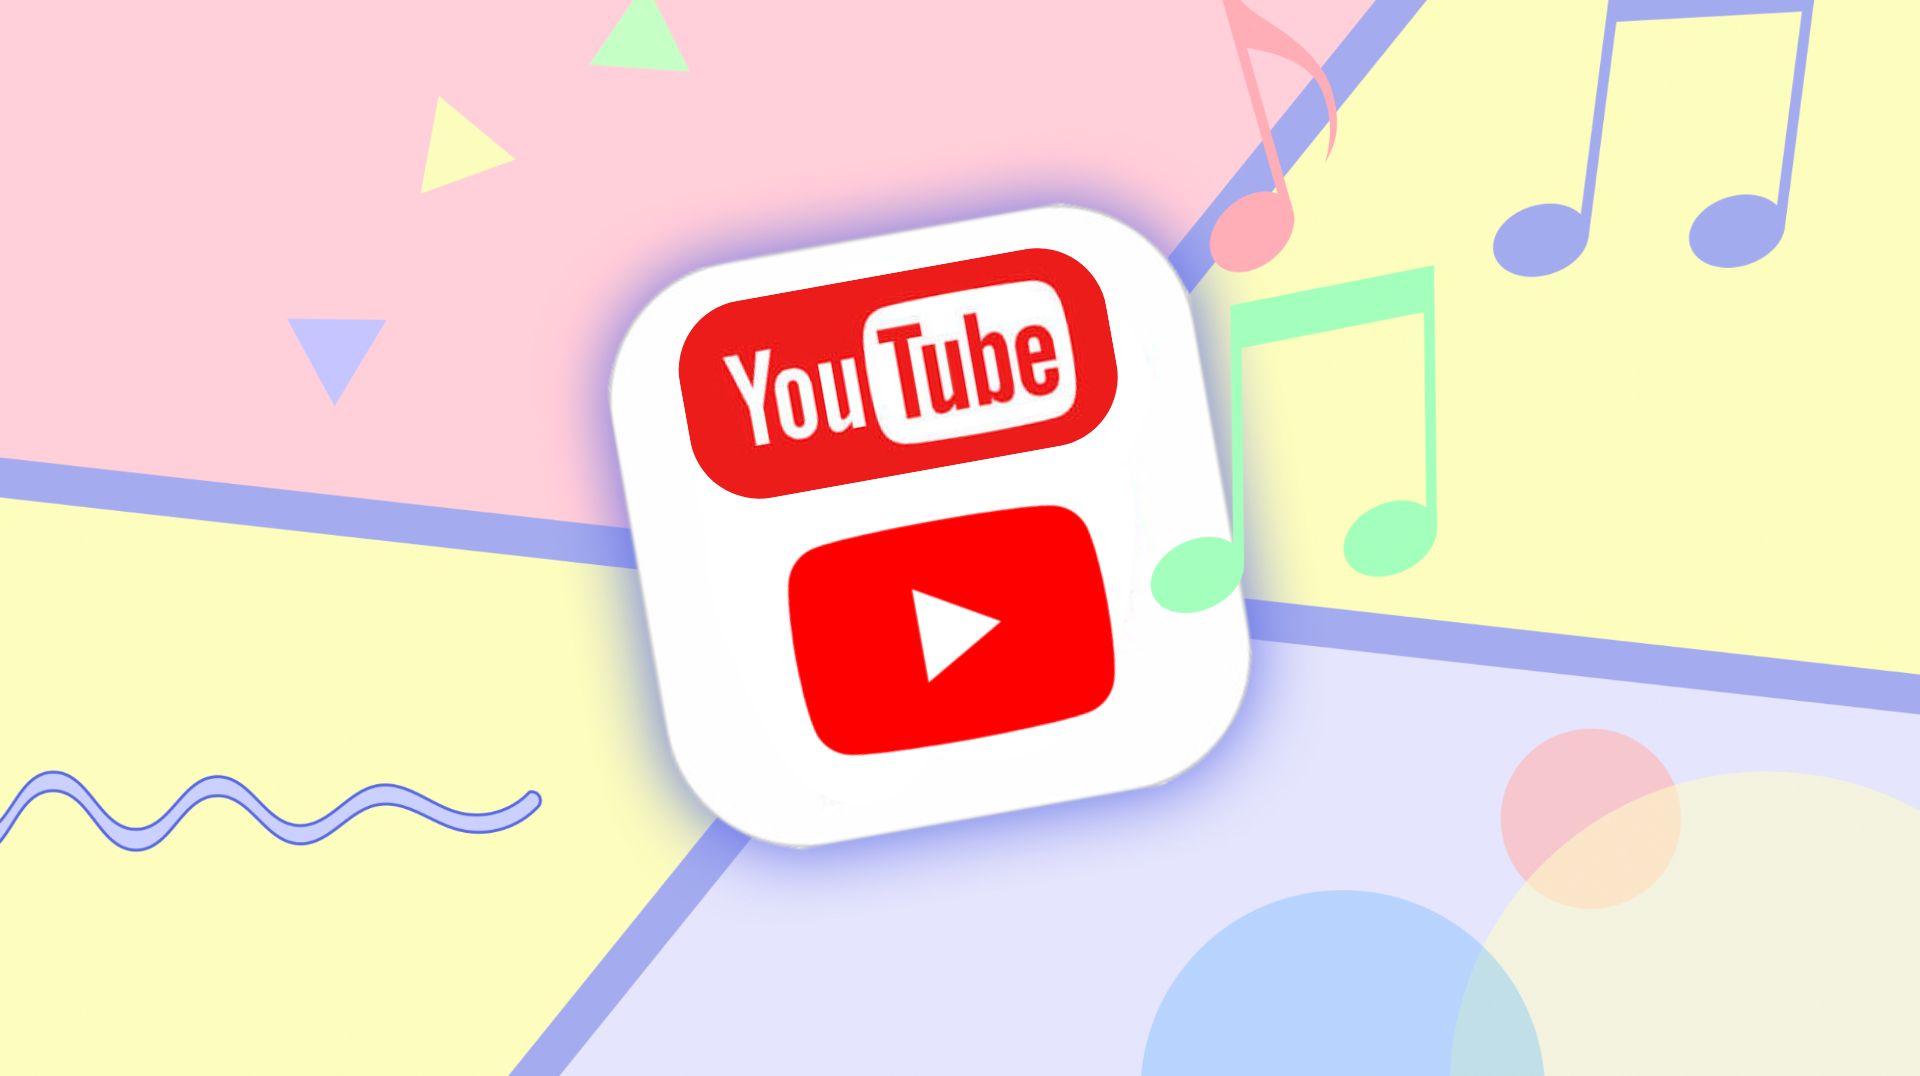 Add Music To Picture For Youtube / Can You Add Songs From Youtube To Apple Music : See how music adds emotional impact to this video.